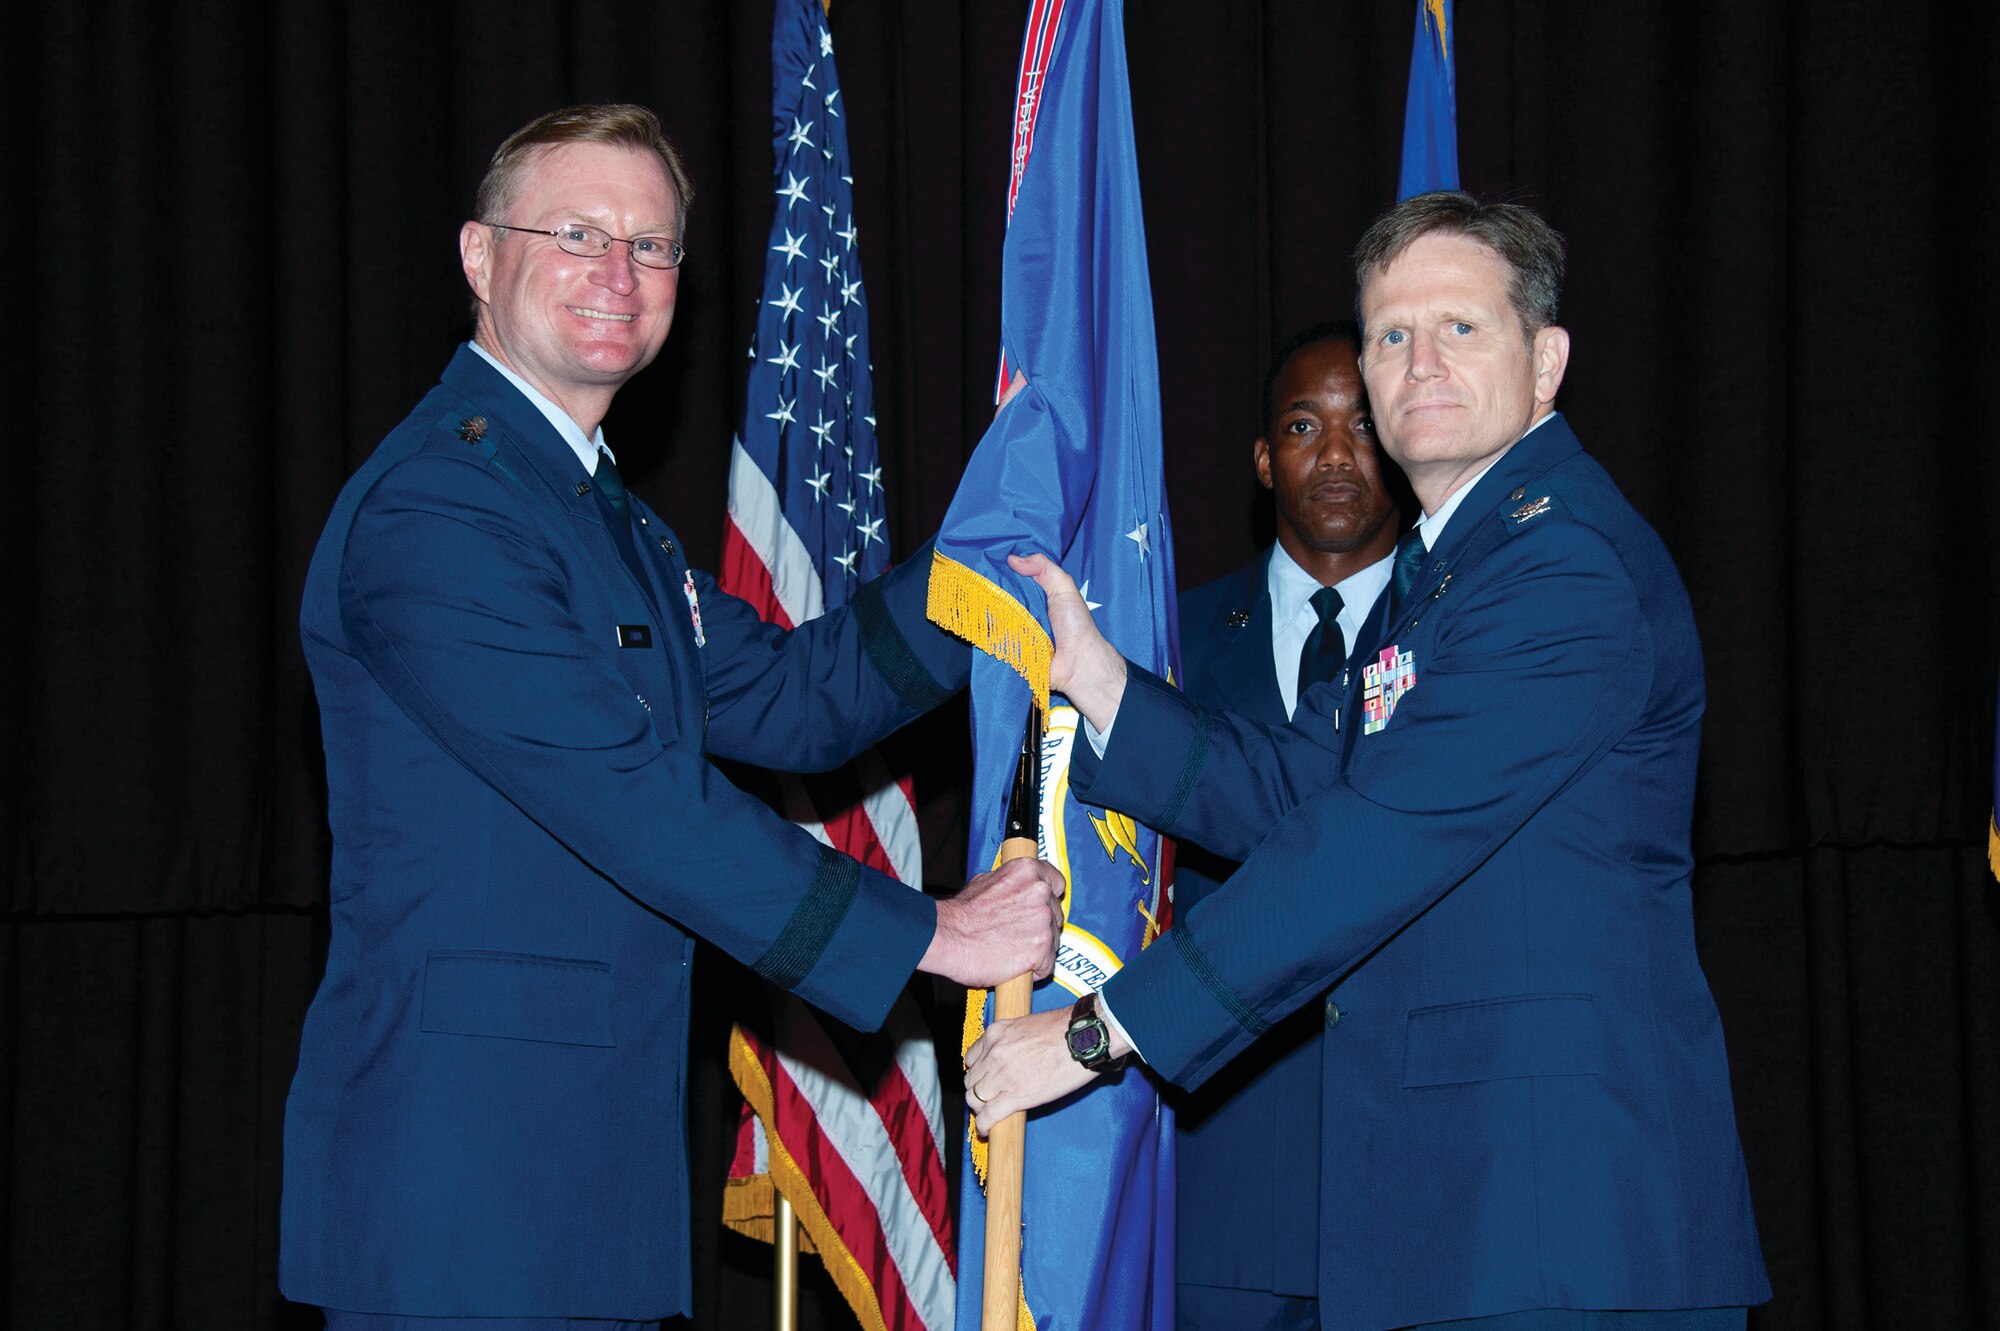 Lieutenant Gen. David Fadok transferred command of the Thomas N. Barnes Center for Enlisted Education to Col. Jefferson Dunn during a change of command ceremony July 24 inside the Air Force Senior Noncommissioned Officer Academy. (U.S. Air Force photo by Melanie Rodgers Cox)